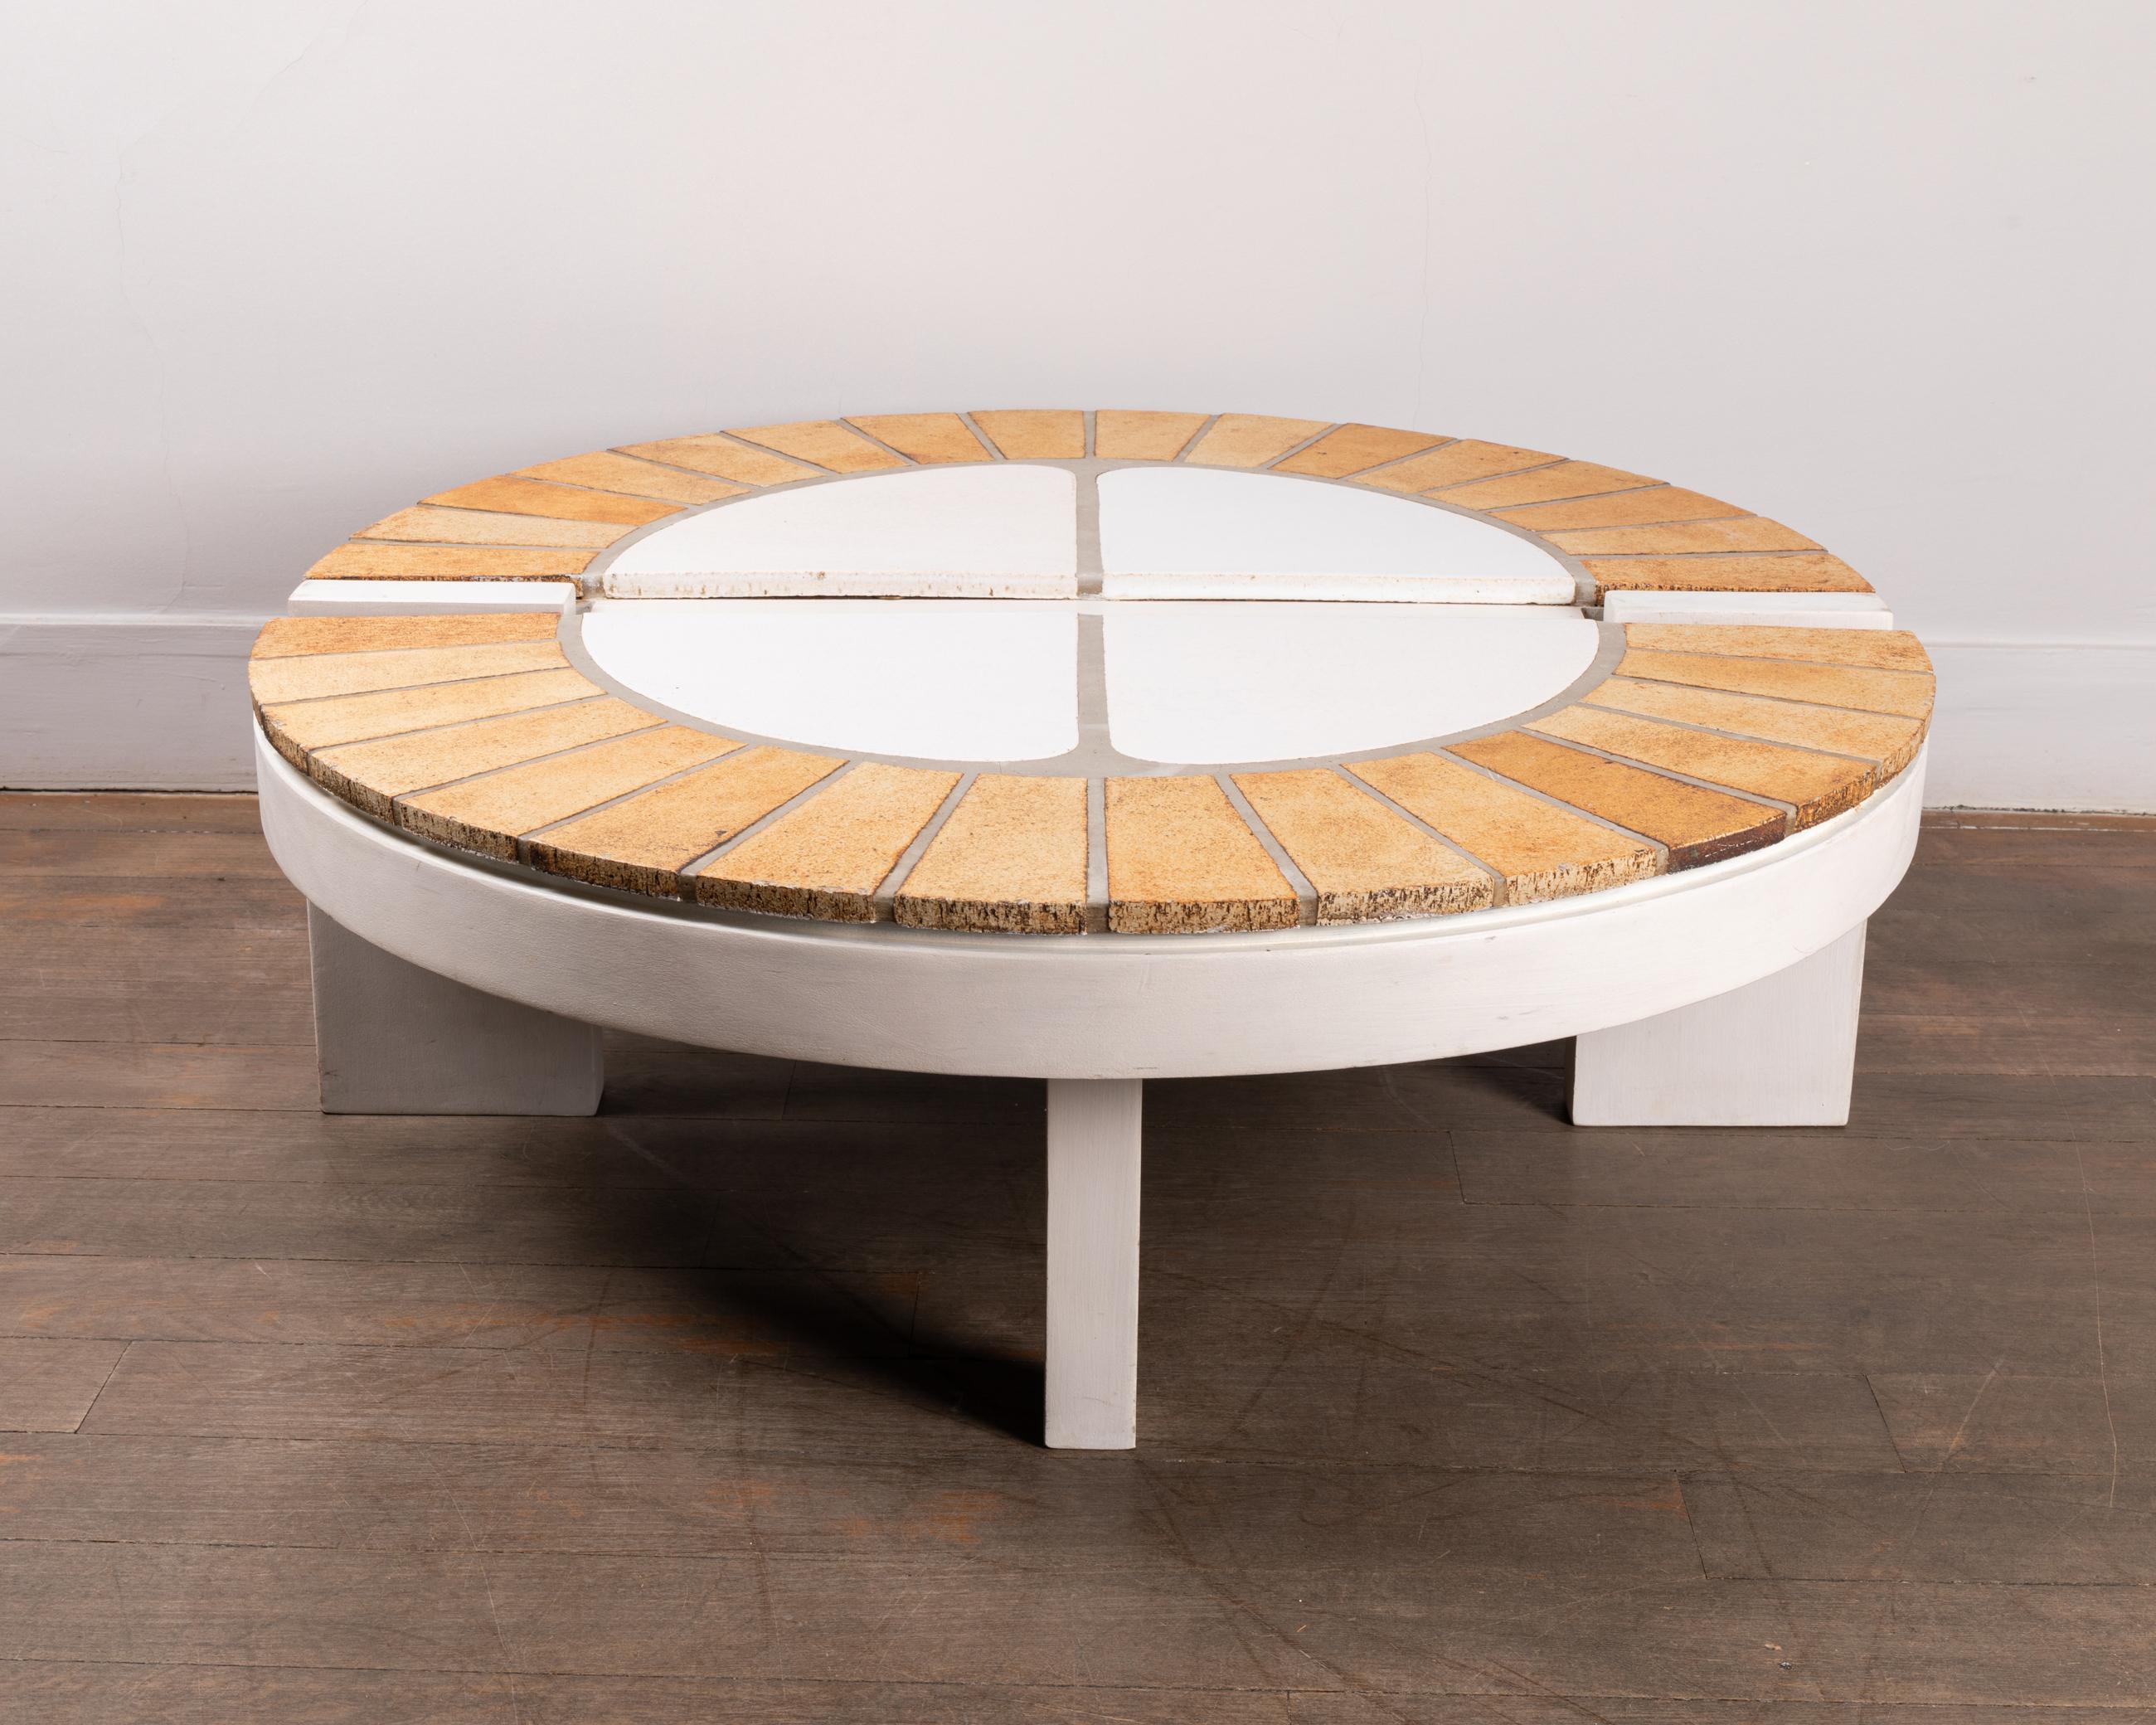 French Oval Ceramic Coffee Table by Roger Capron, Vallauris, 1960's